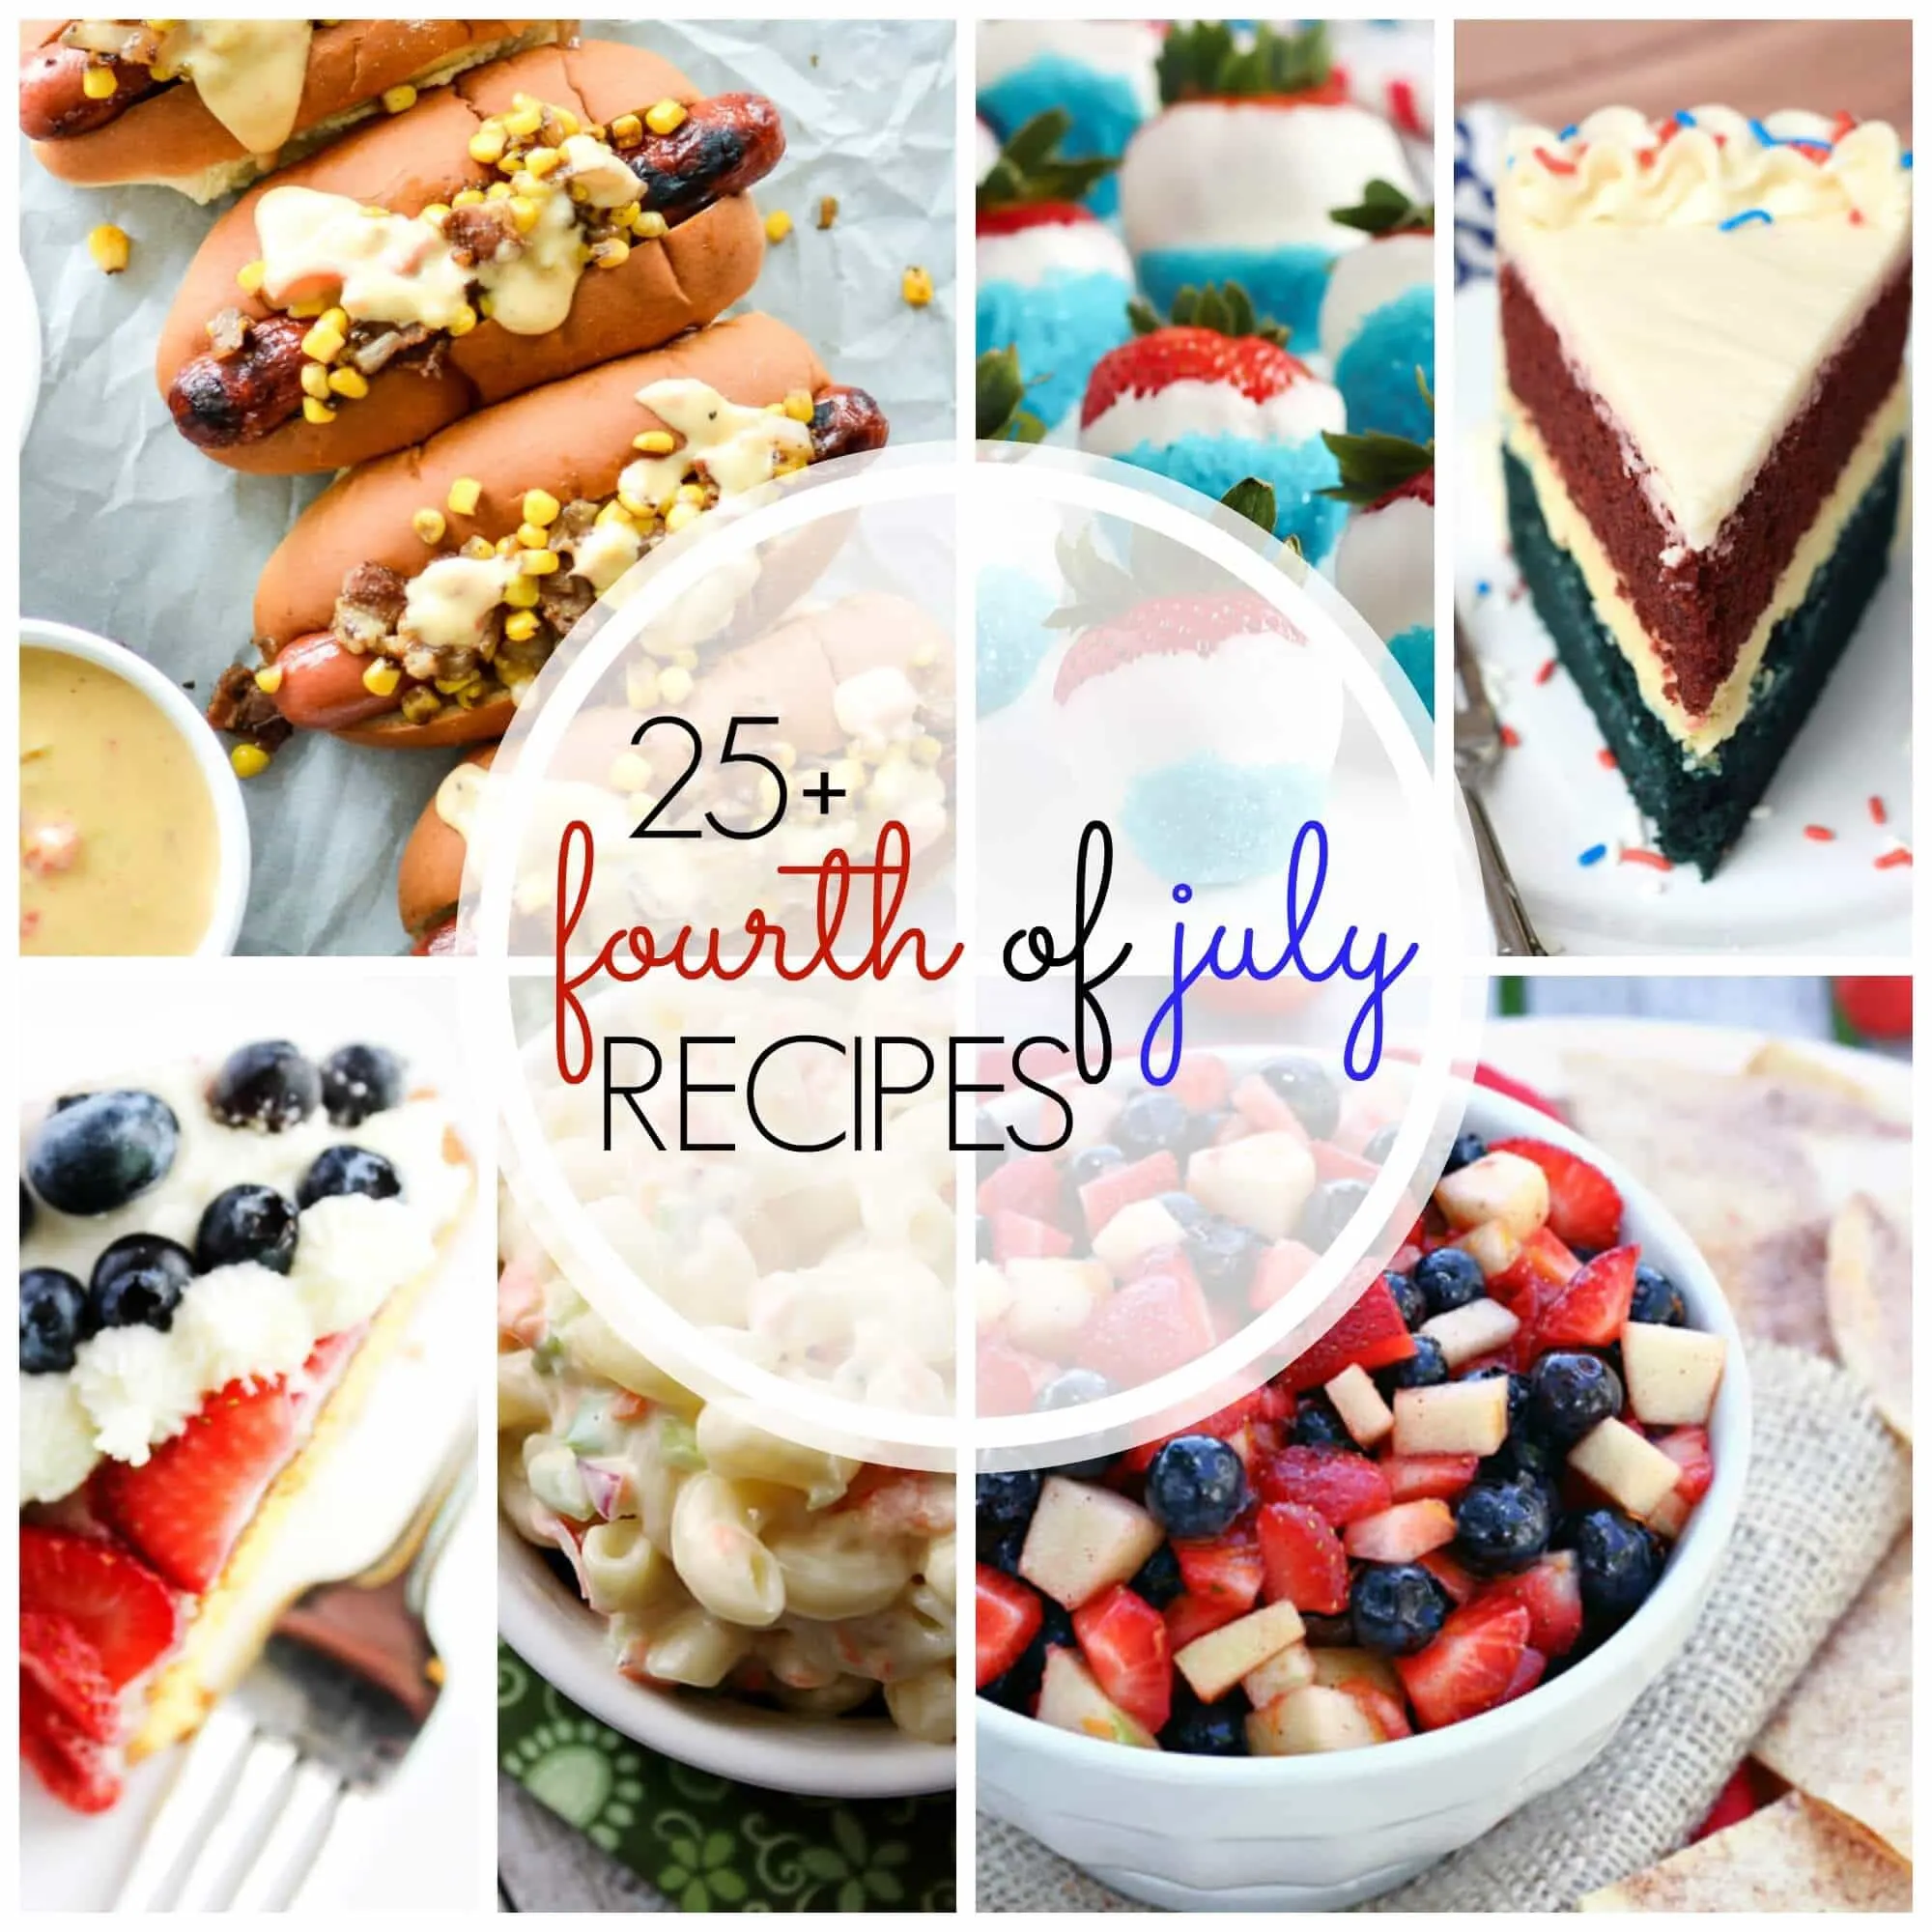 Recipes for the 4th of July - Over 25 recipes to make sure you have a fun and festive 4th of July!